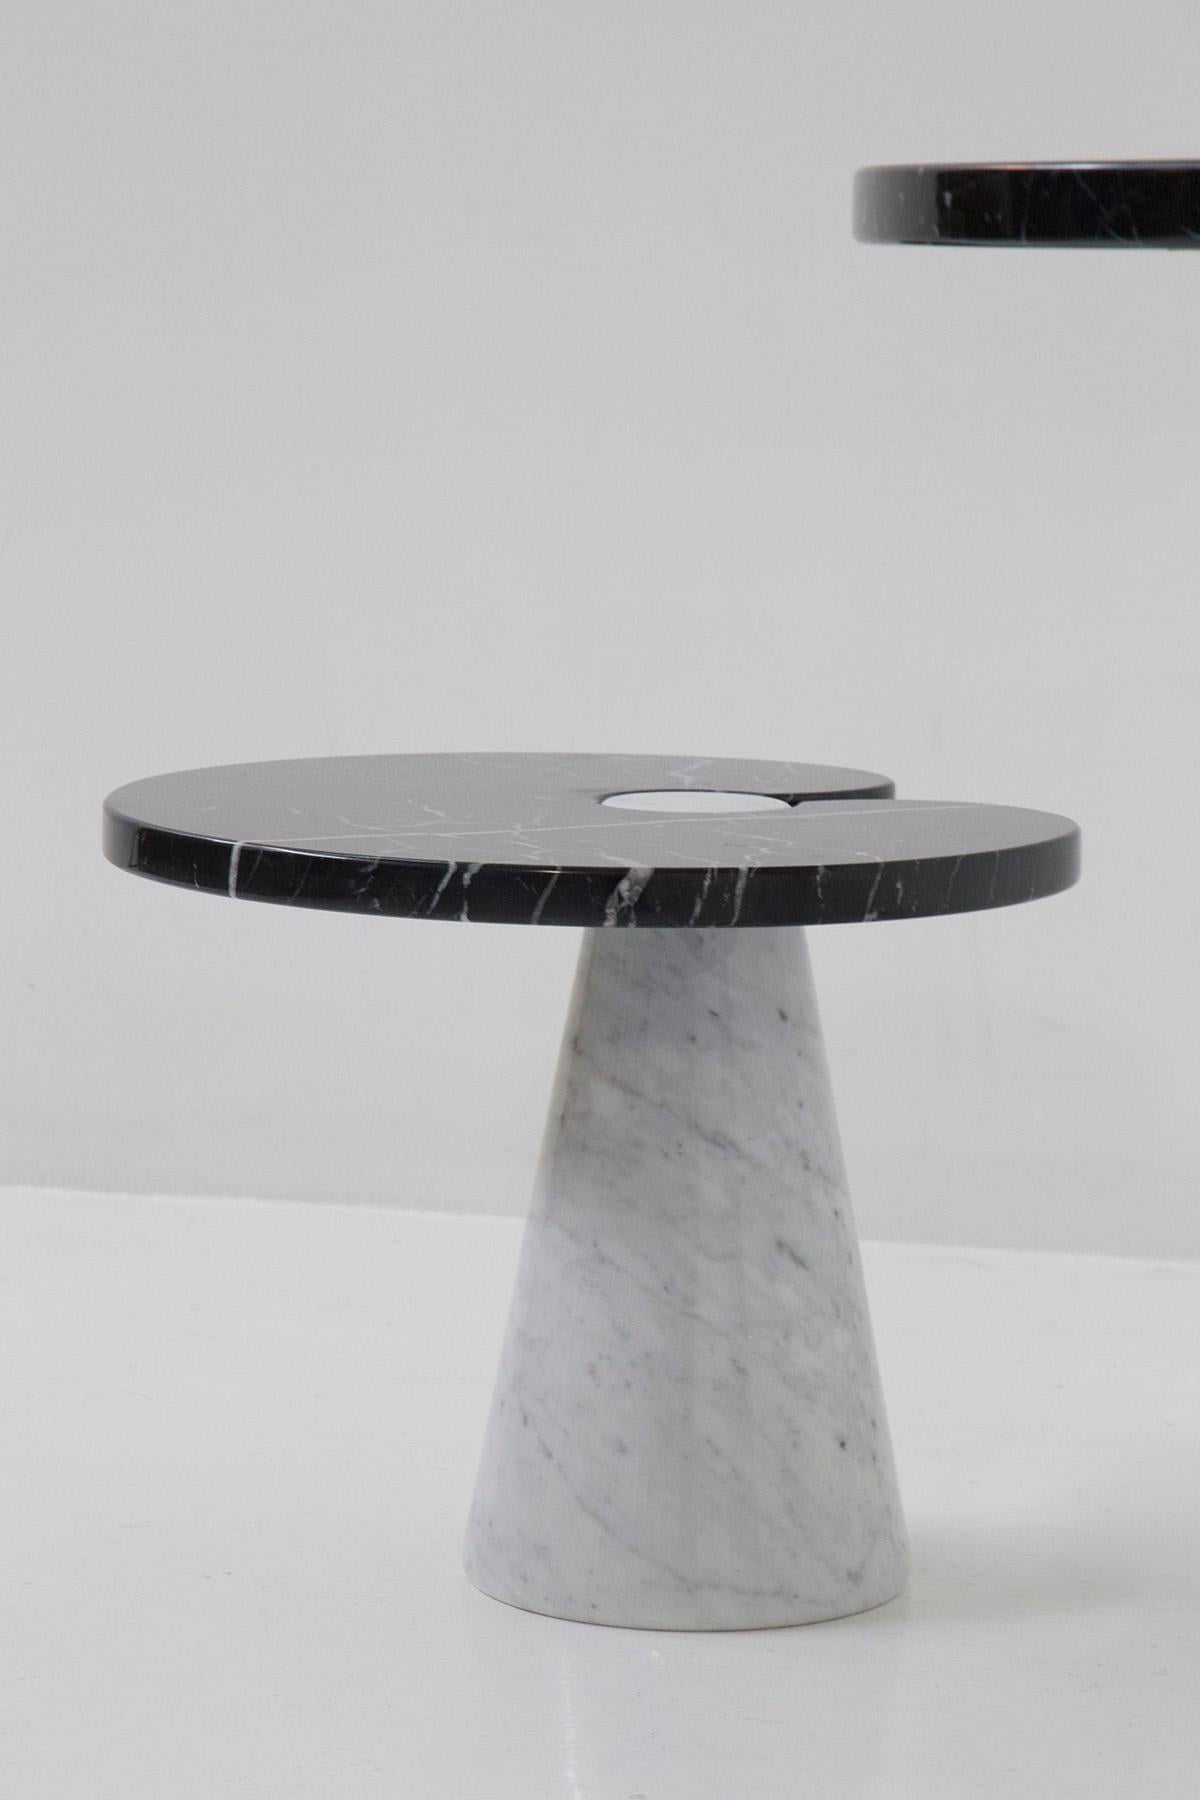 Marble Angelo Mangiarotti Side Tables for Skipper Rare Black and White Colour